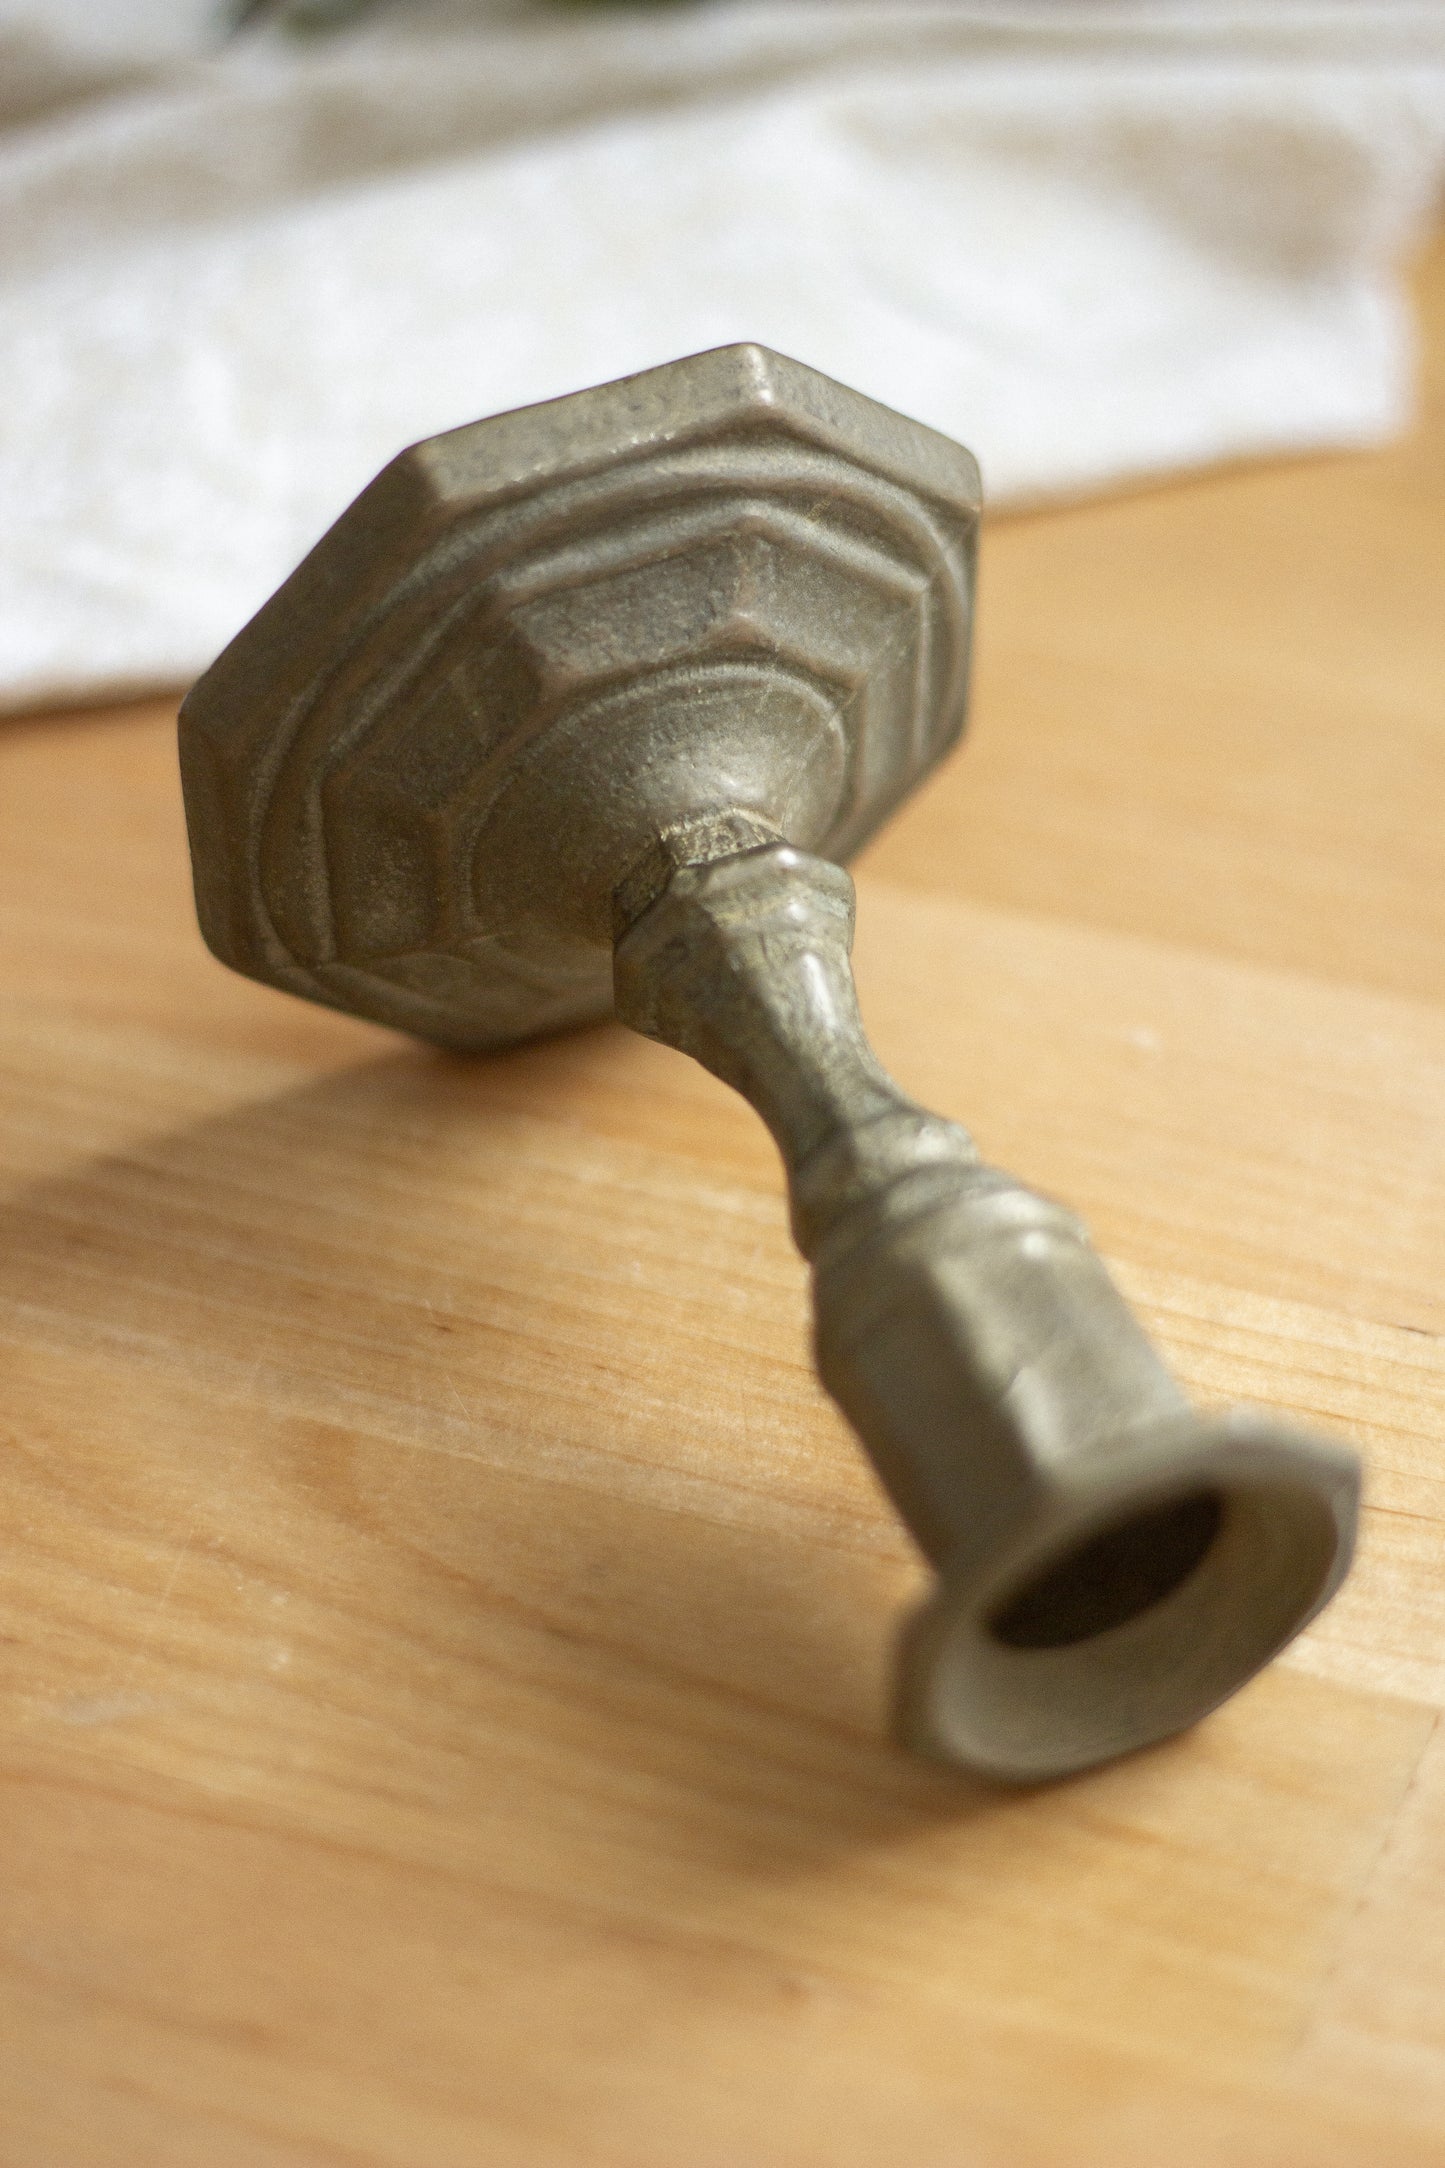 Solid Brass Candlestick